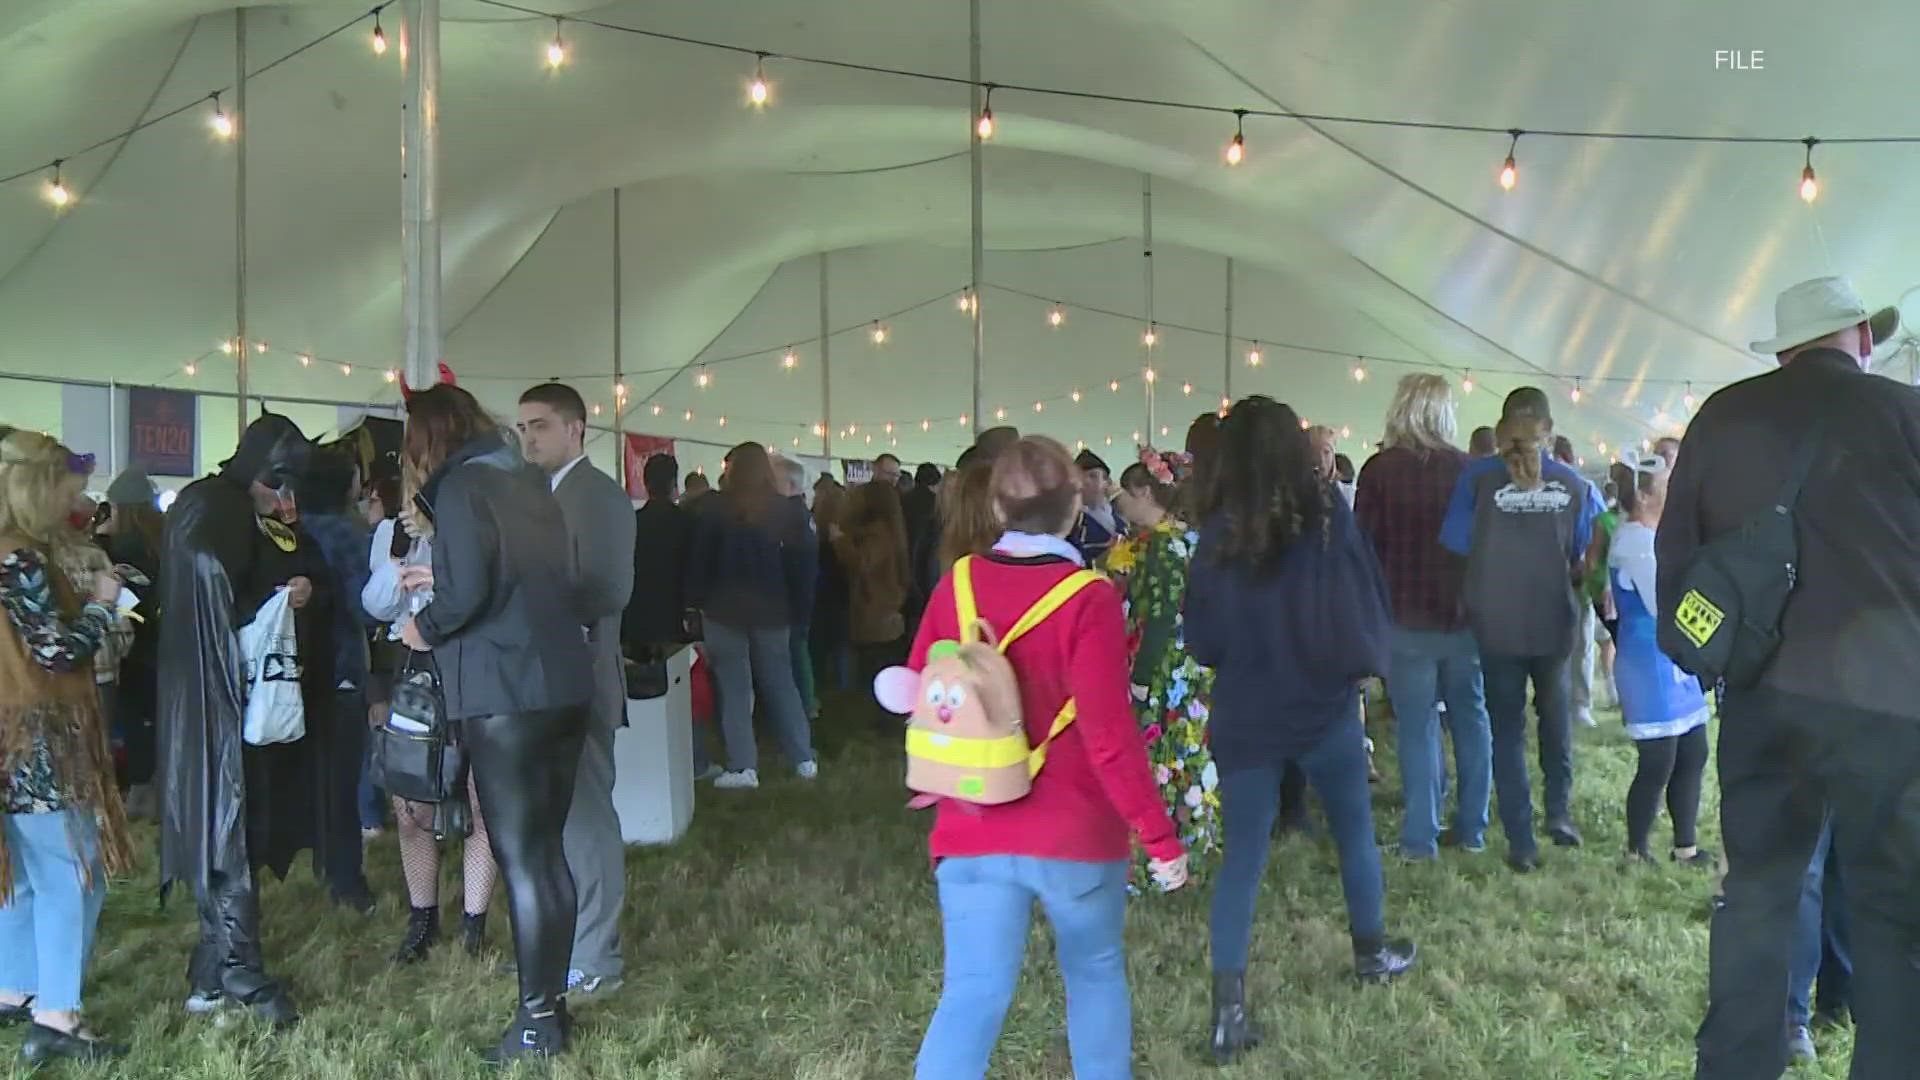 WHAS11's Taylor Woods shows us what we should expect at this year's Tailspin Ale Fest at Bowman Field.